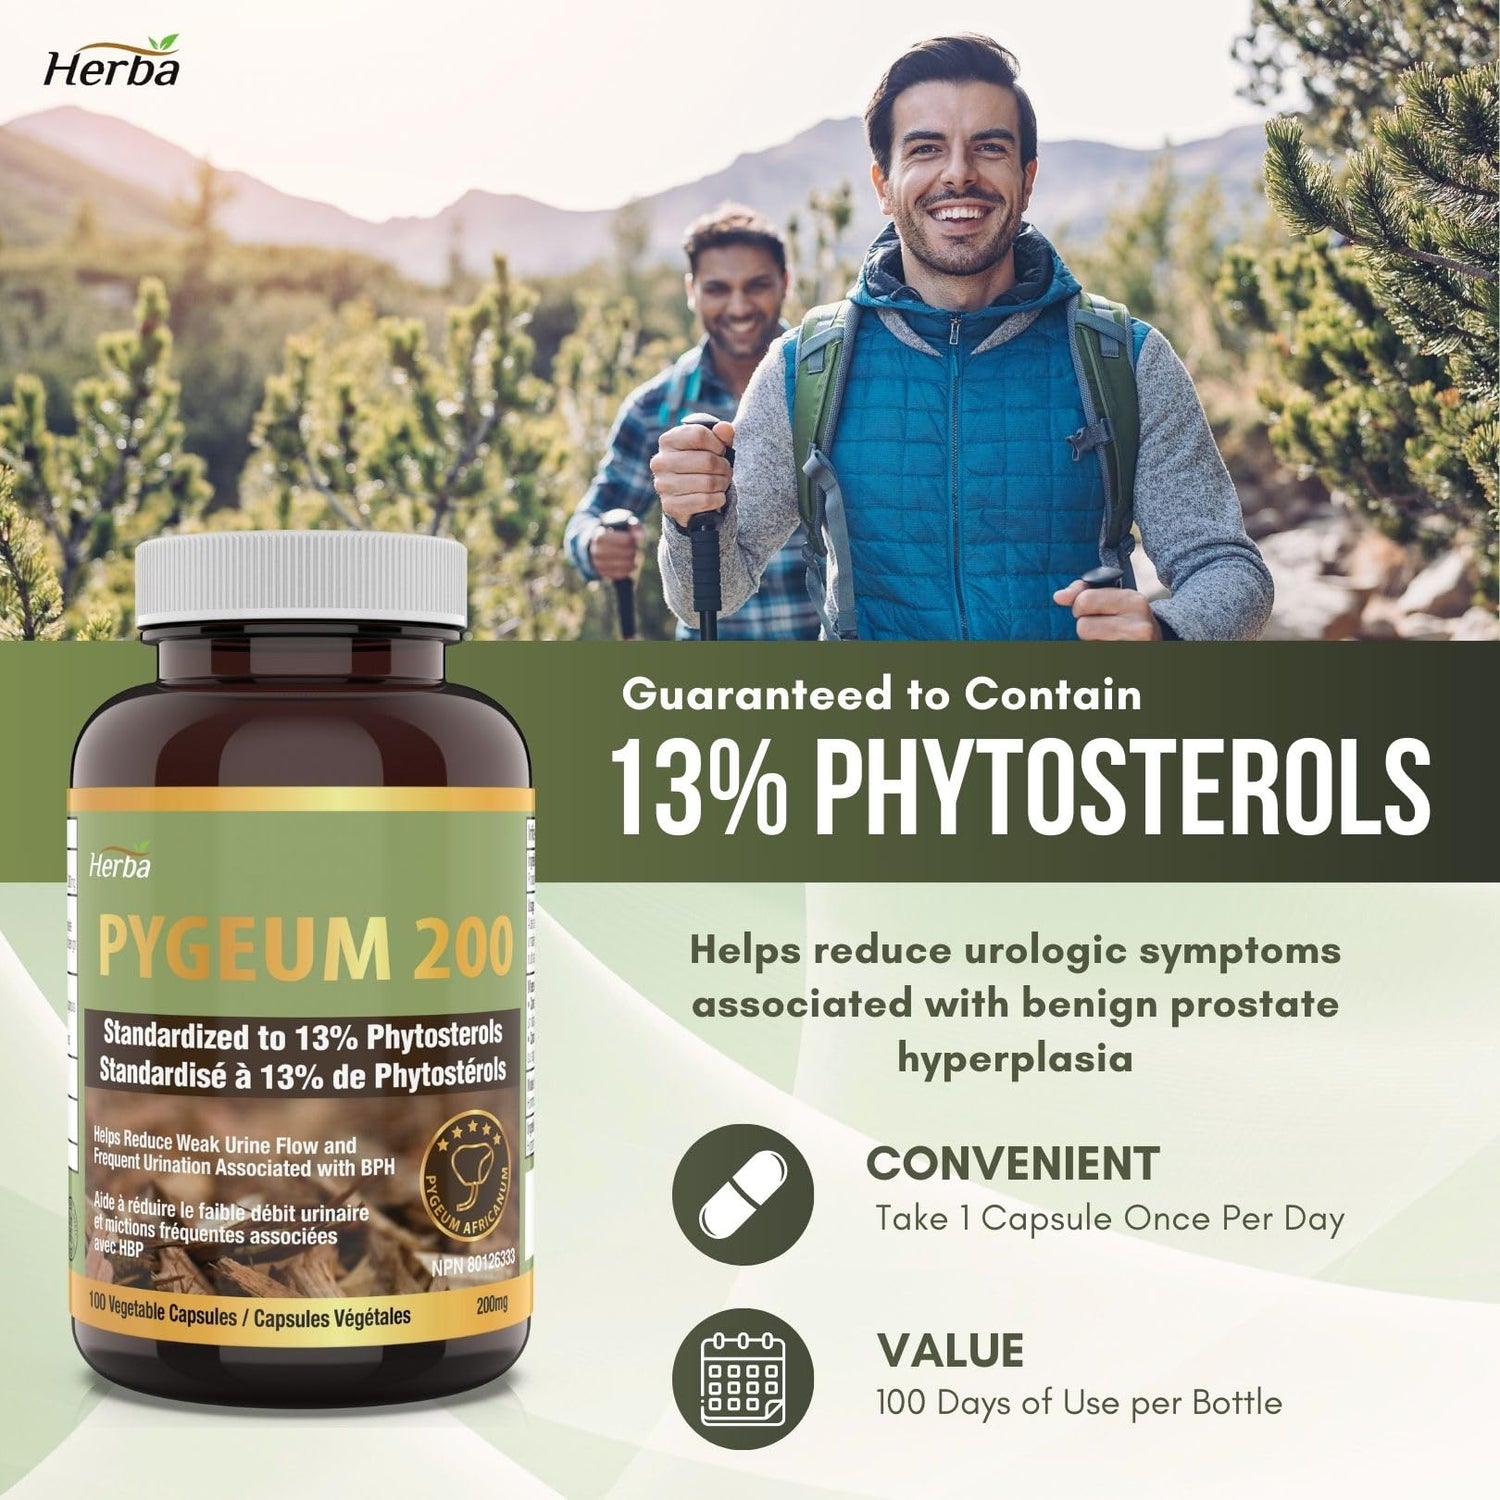 Herba Pygeum Supplement 200mg – 100 Capsules